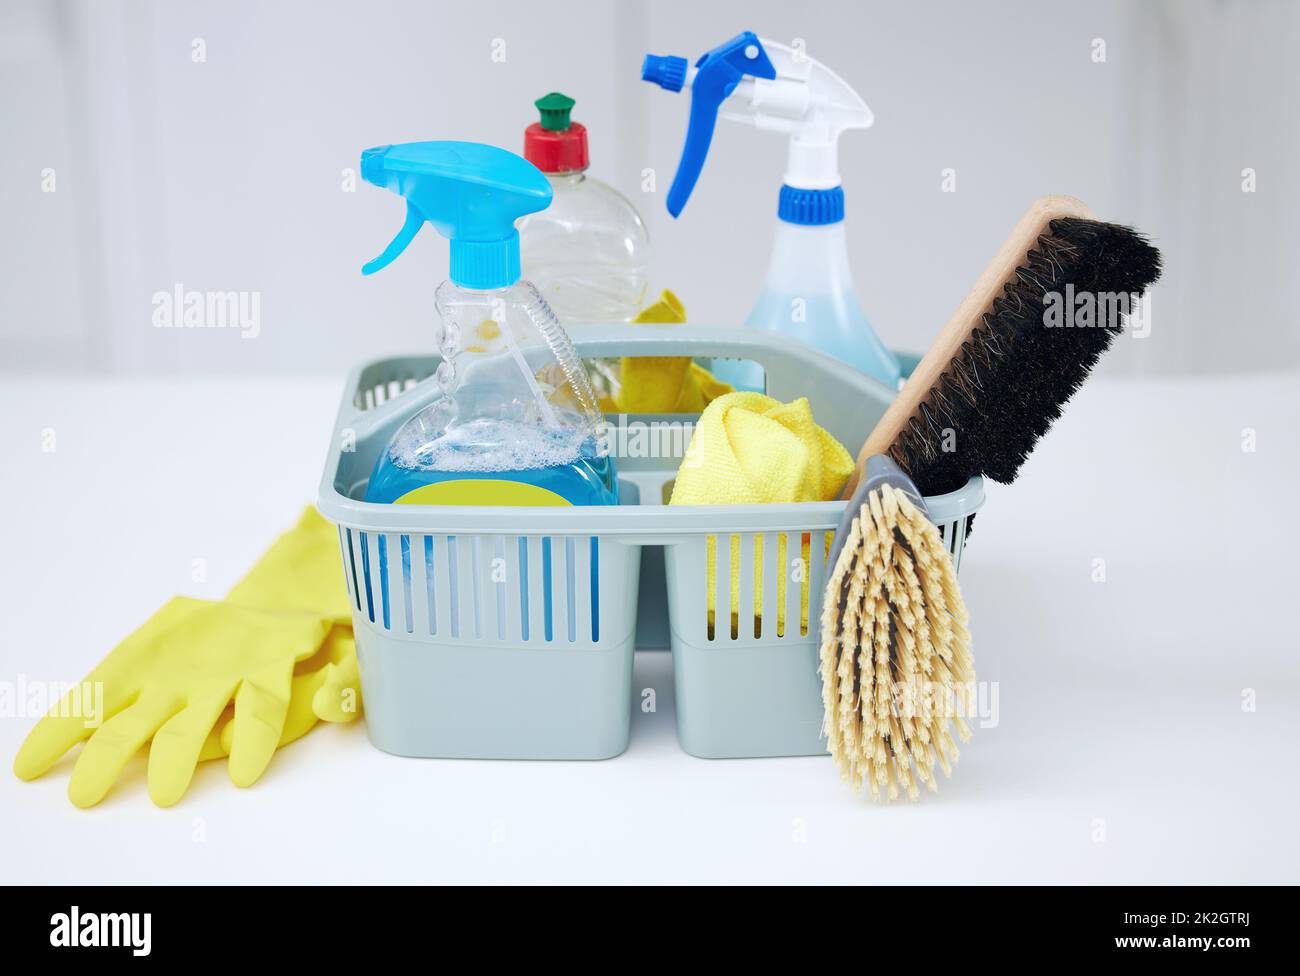 https://c8.alamy.com/comp/2K2GTRJ/ready-for-action-shot-of-cleaning-supplies-in-a-basket-on-a-table-2K2GTRJ.jpg